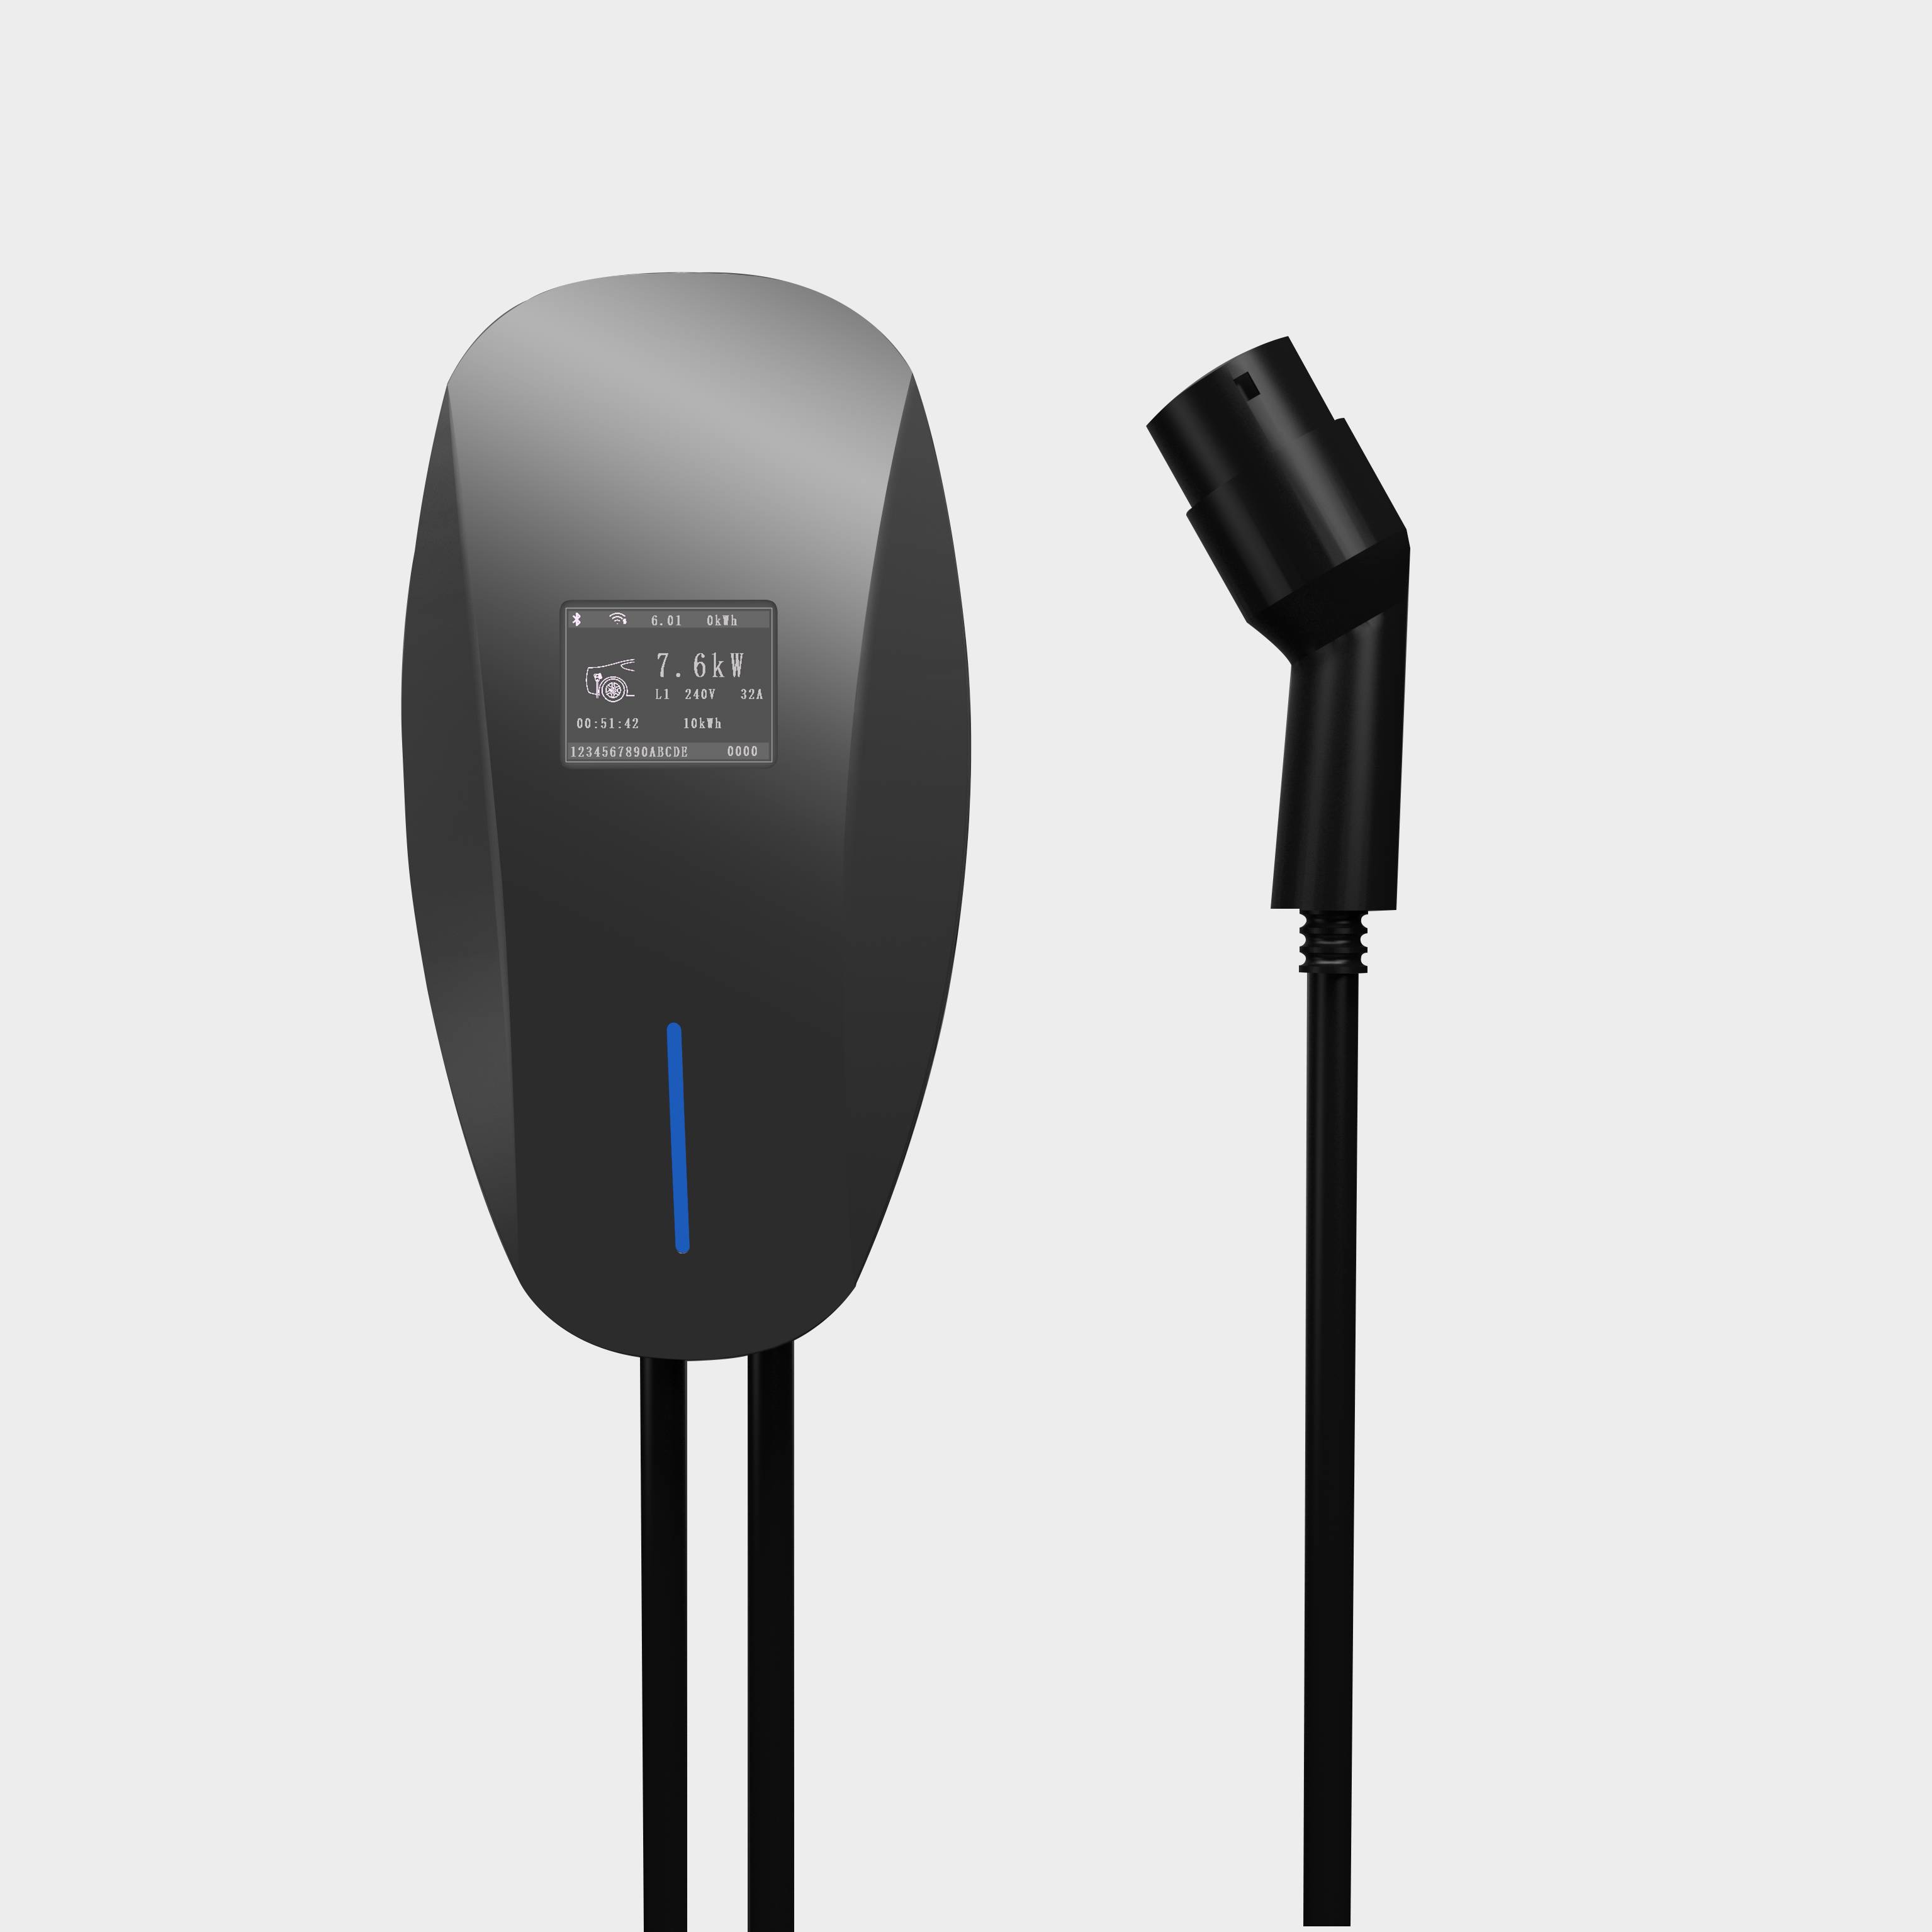 https://www.wyevcharger.com/ac-ev-charger-stations-hm-series-product/